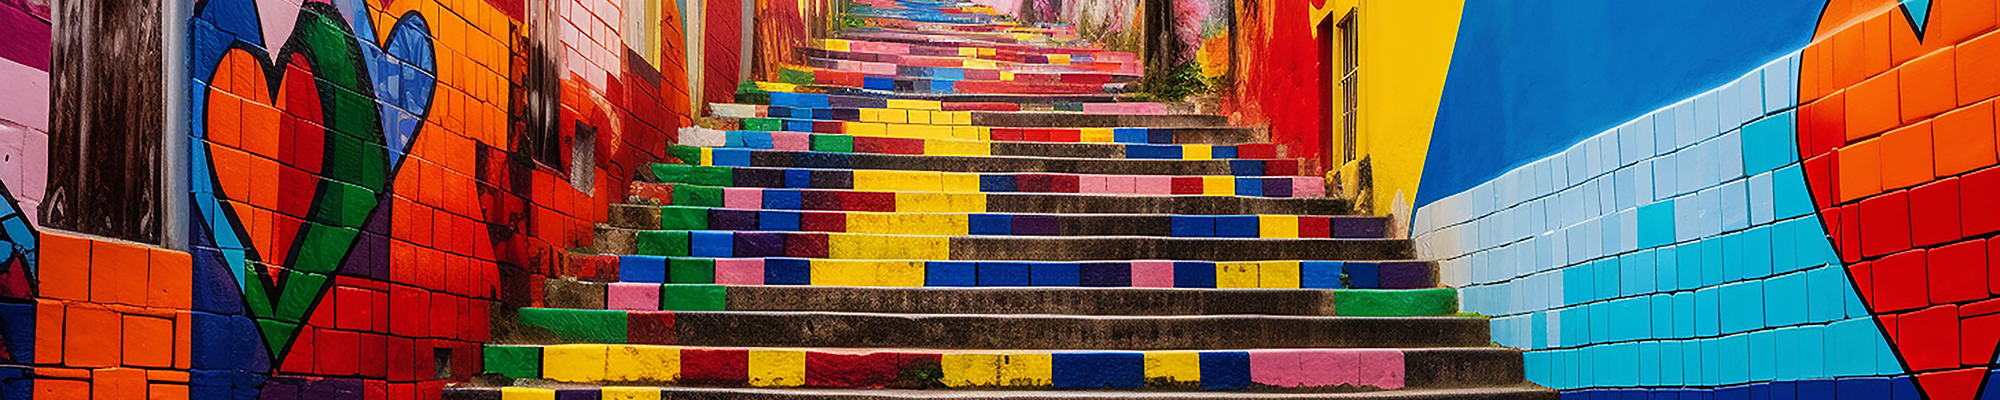 colorful stairs in Brazil favela